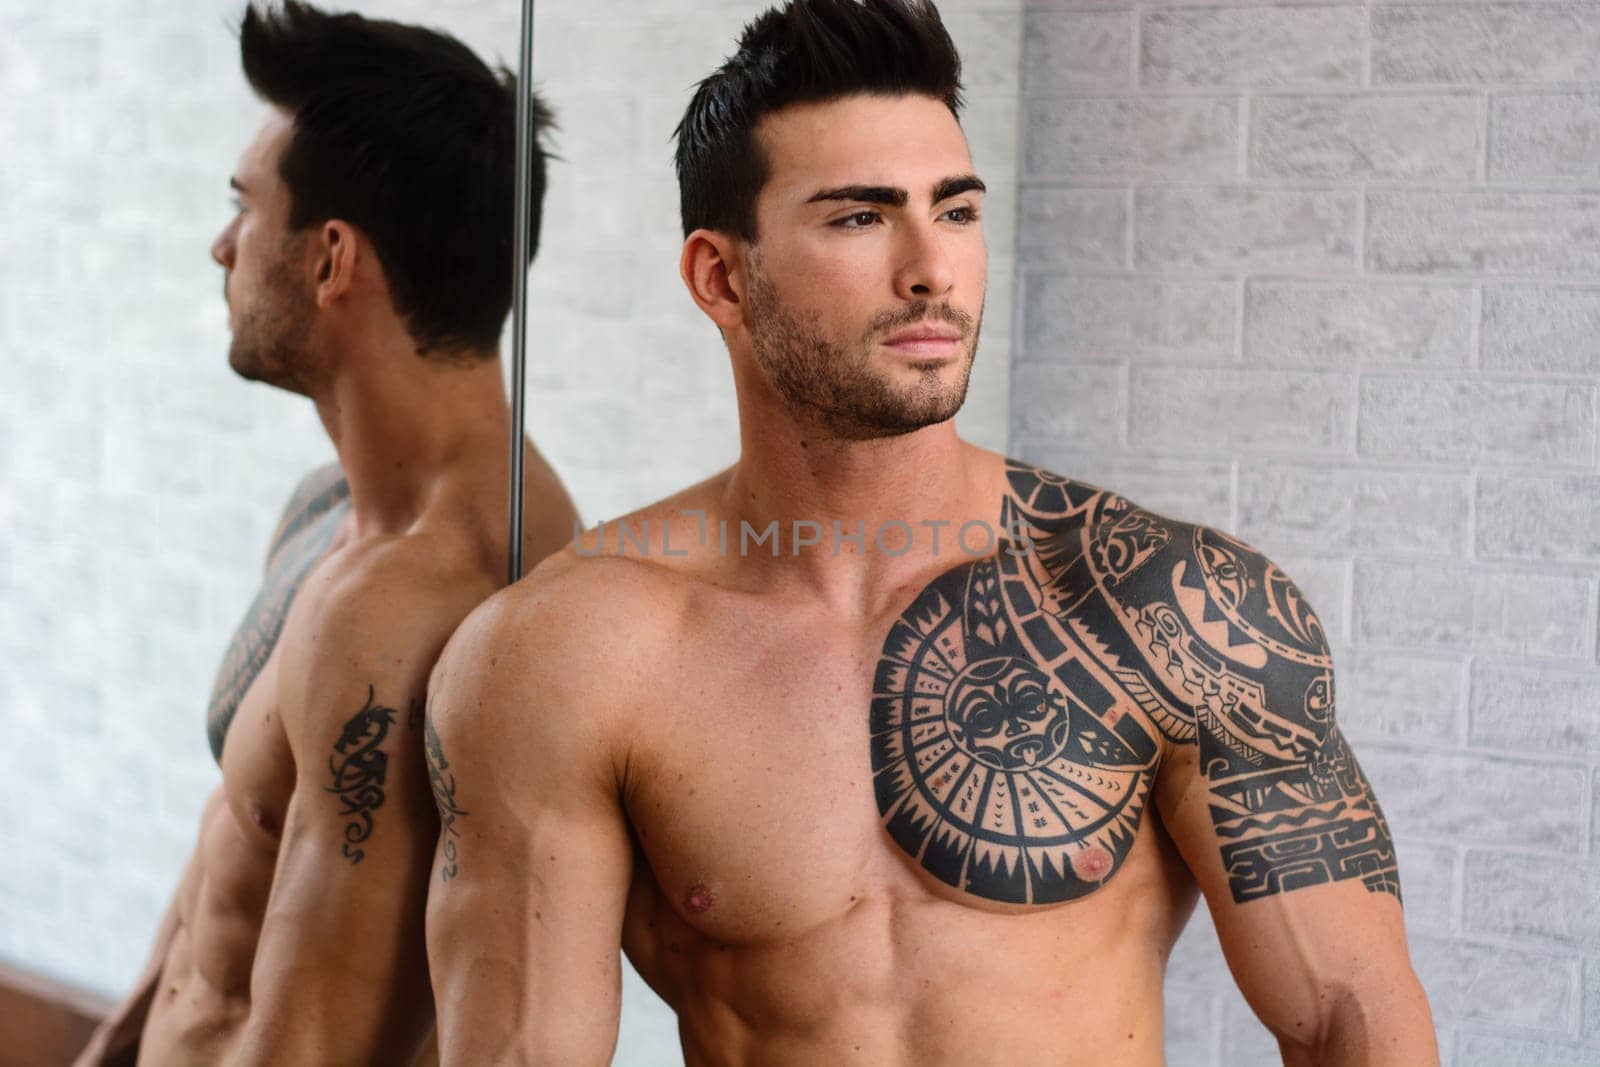 A handsome muscular man with tattoos standing in front of a mirror